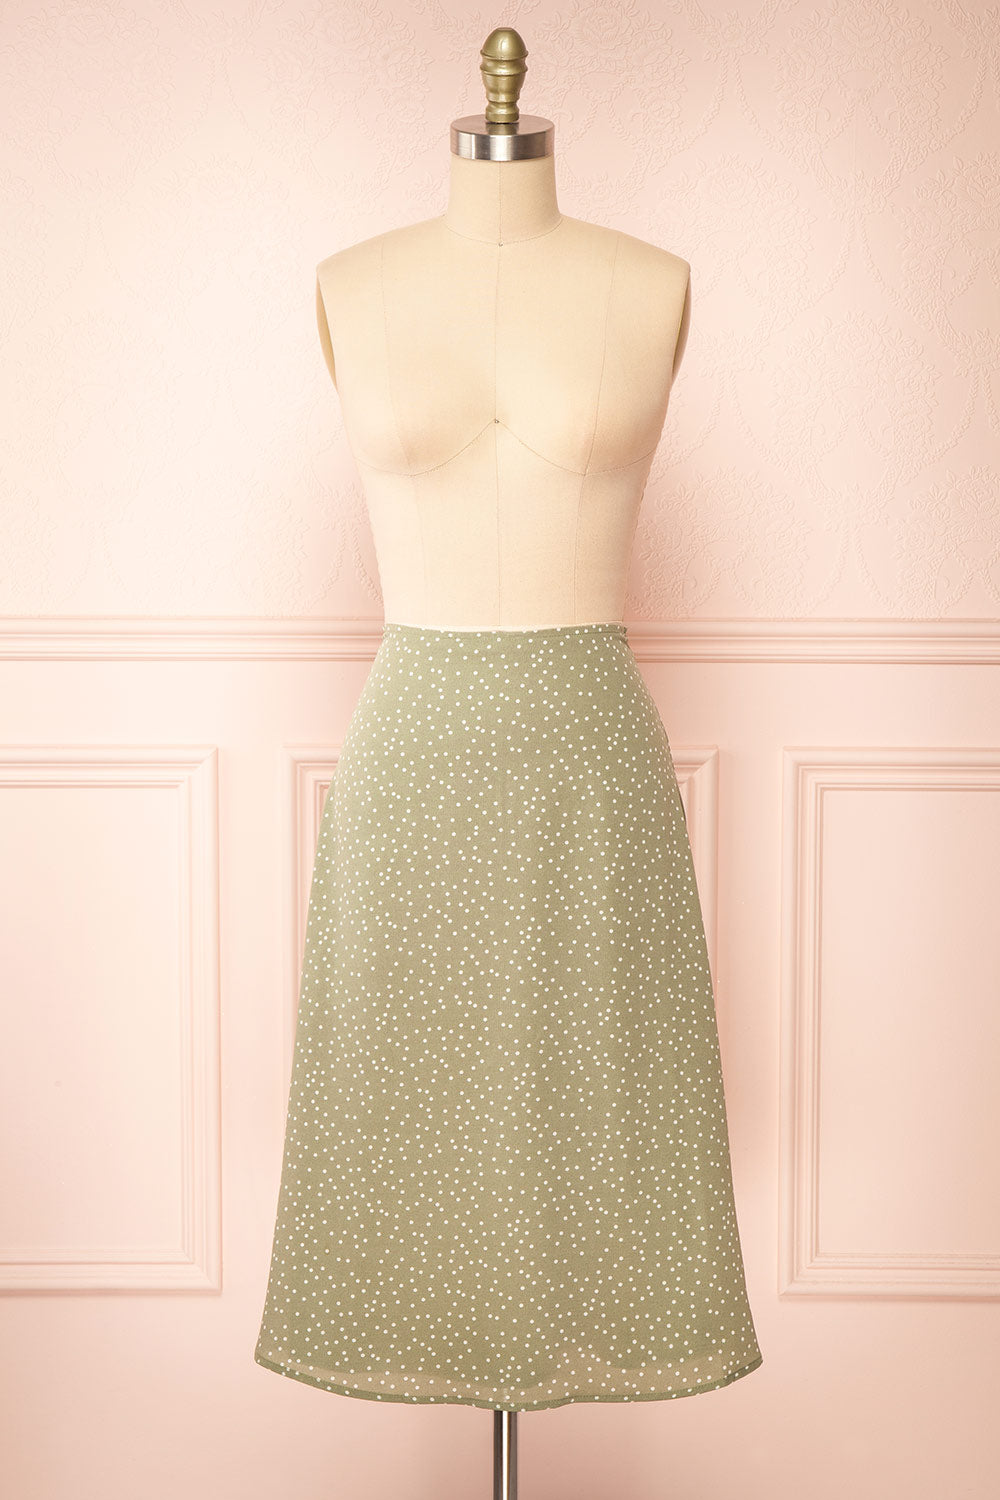 Yure Polka Dot Green A-line Midi Skirt | Boutique 1861 front view 